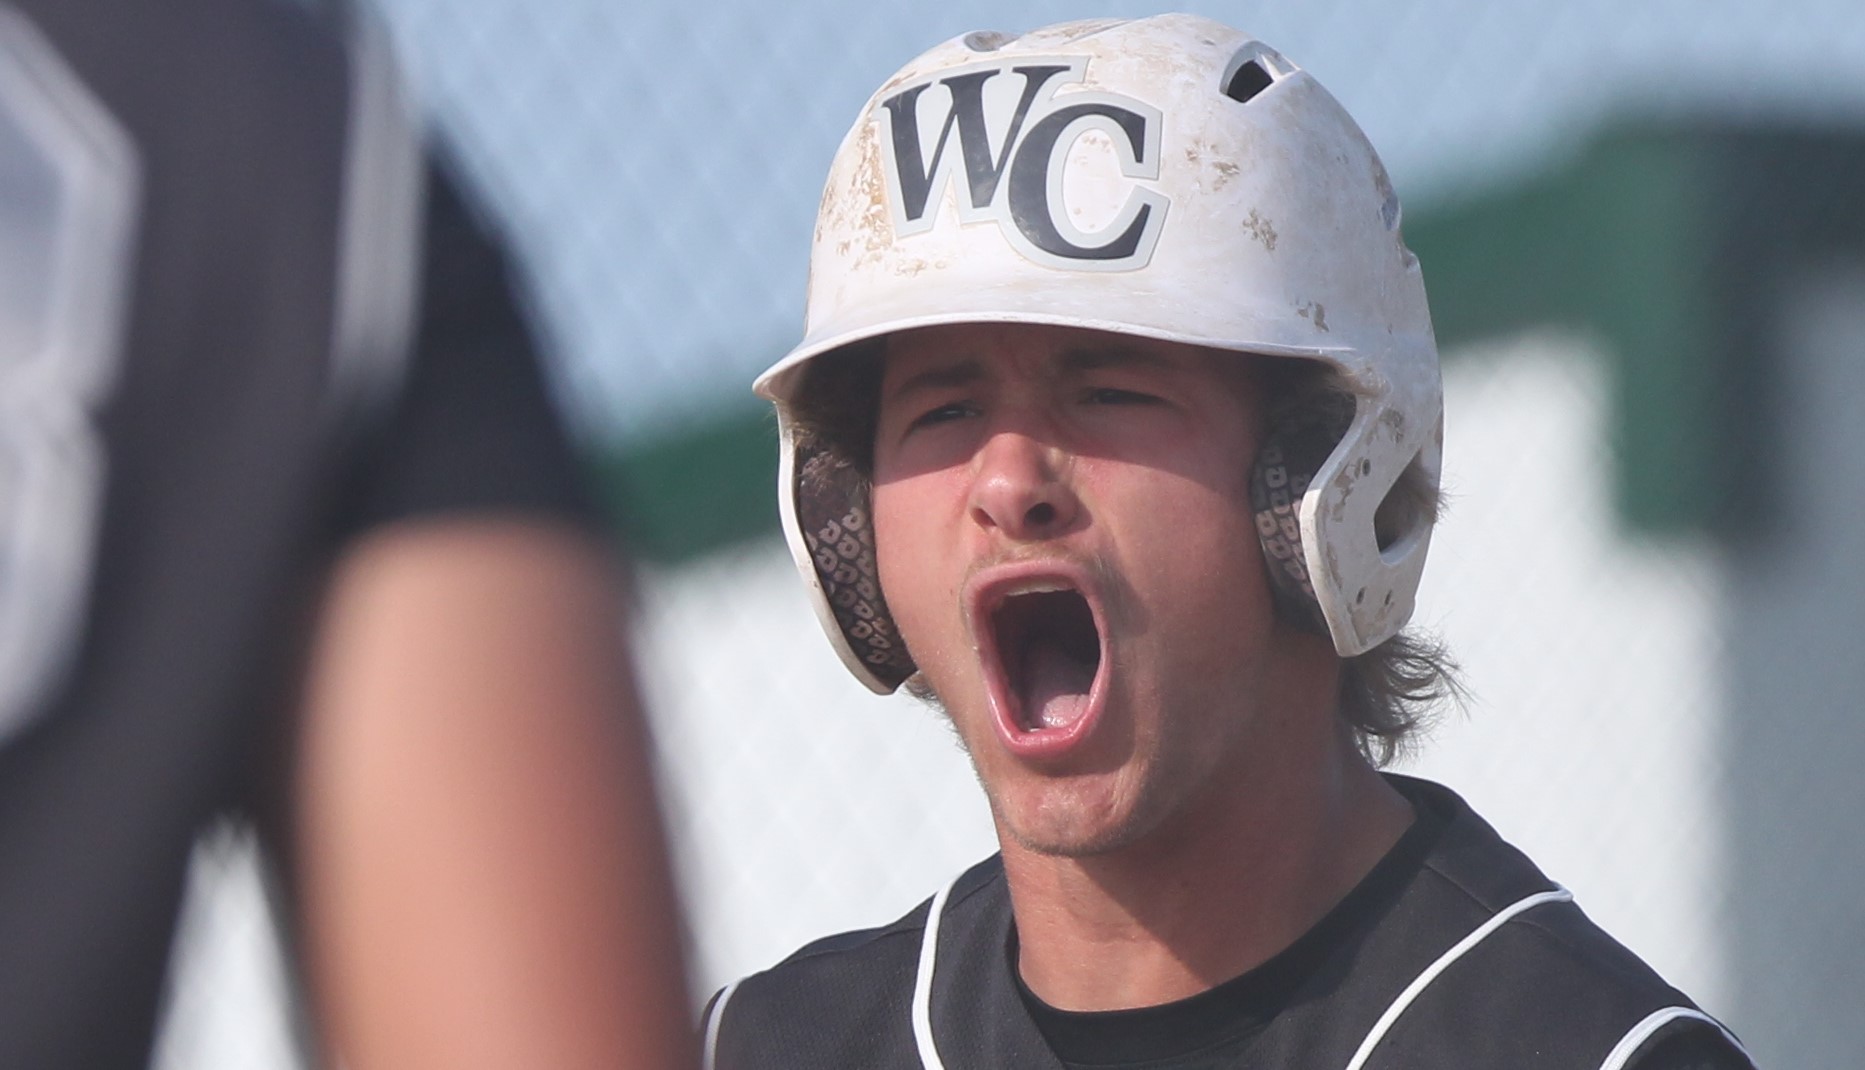 West Central stuns Bushnell, full story with photos